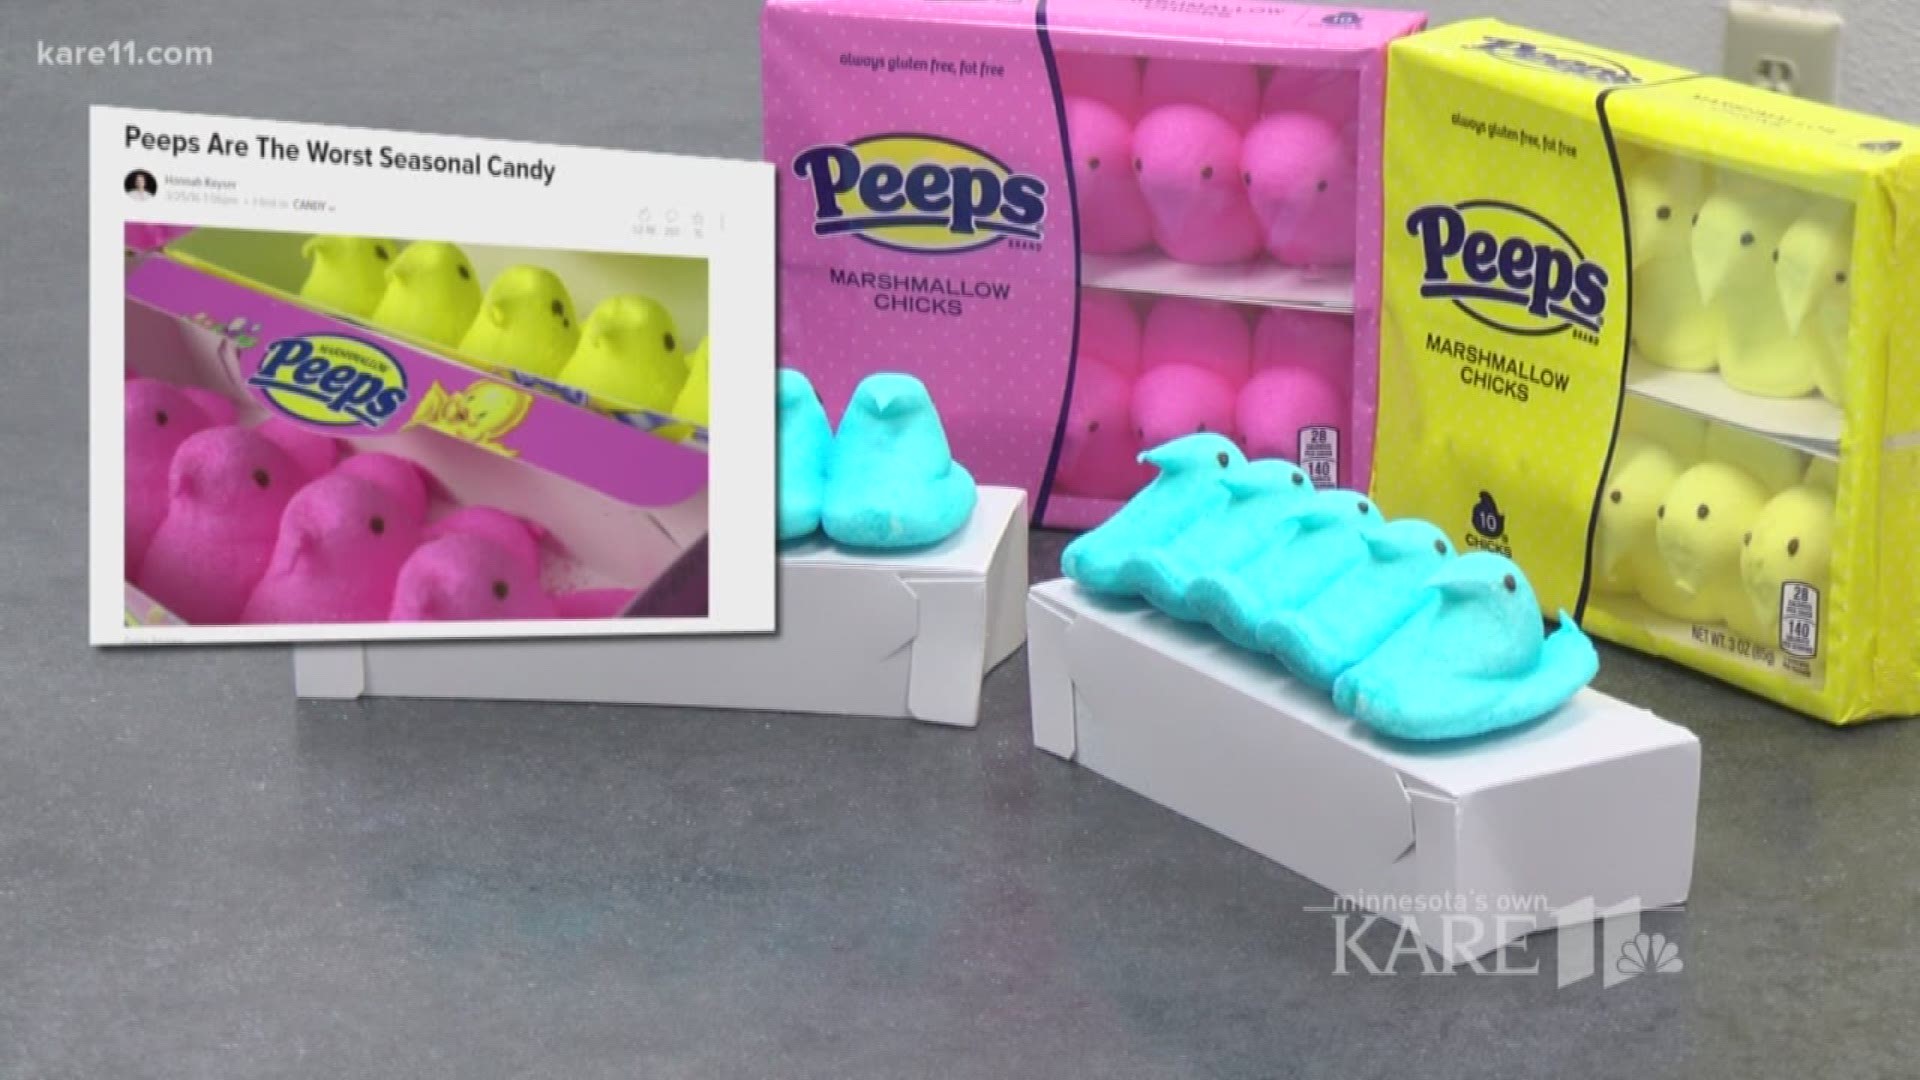 An Easter staple for years, there are web articles which claim Peeps are the most unhealthy candy to eat on the holiday. But are they, really? https://kare11.tv/2GrinvH